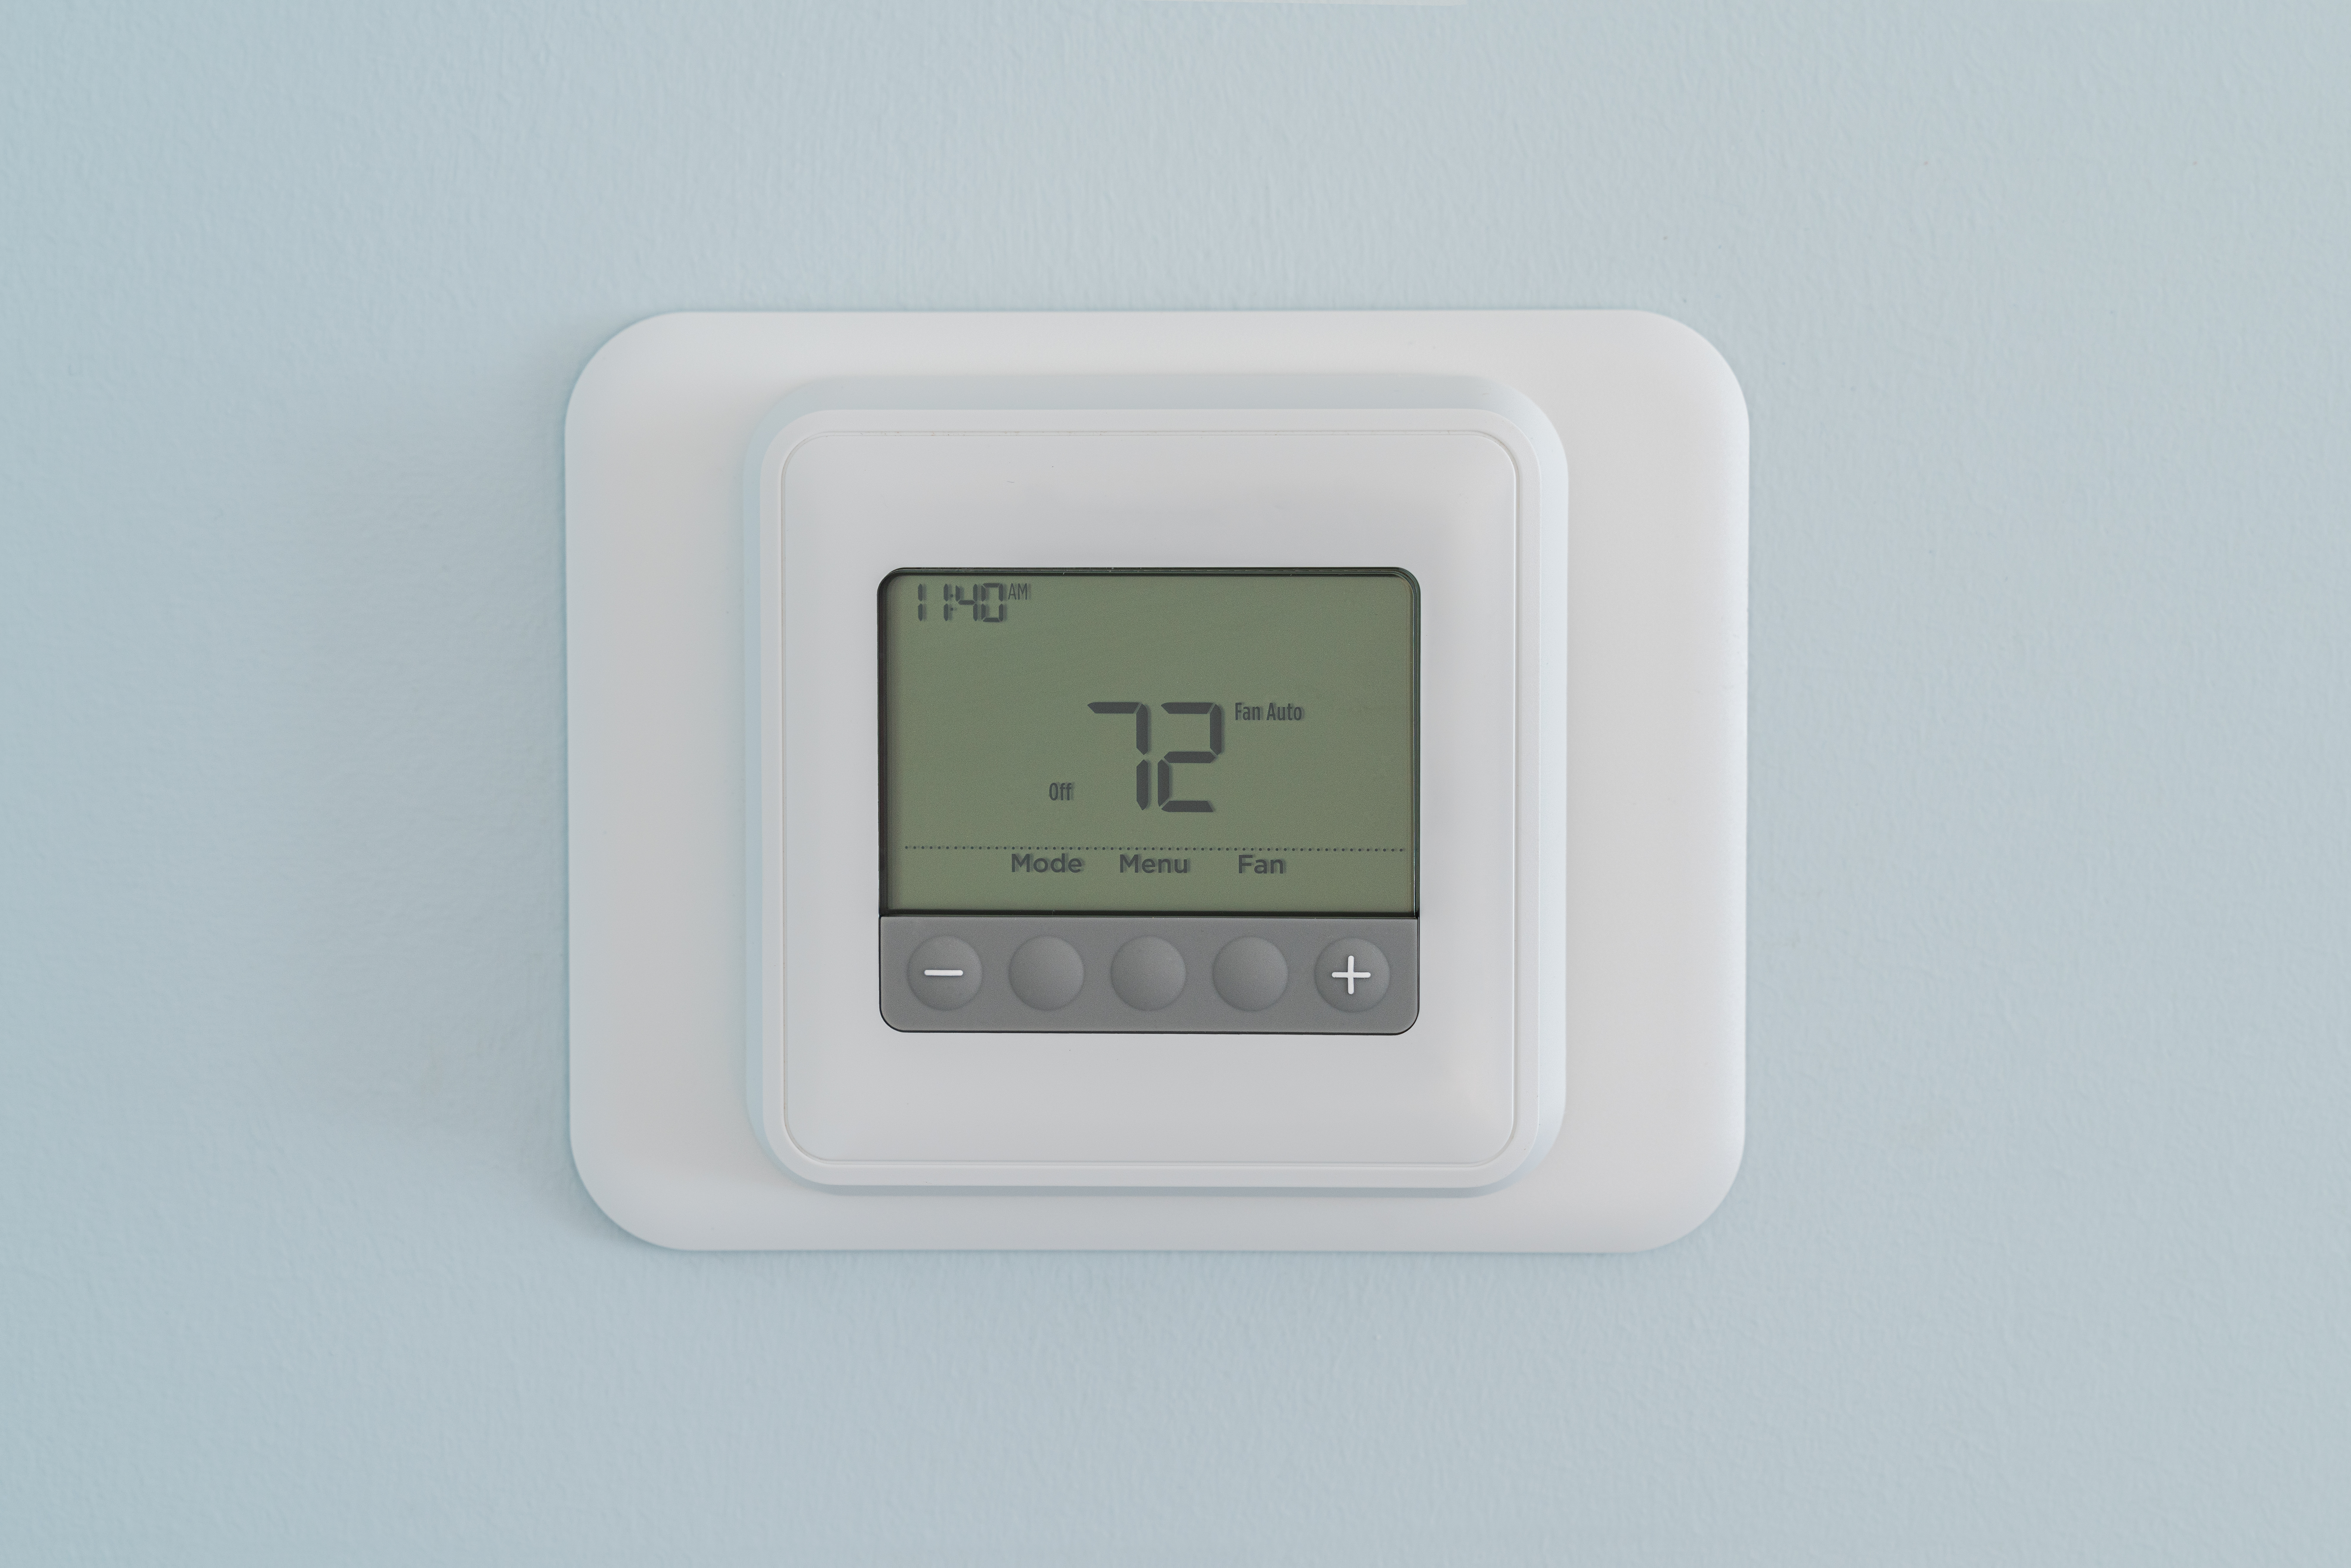 DIY vs Professional Smart Thermostat Installation: Why You Should Call an Expert